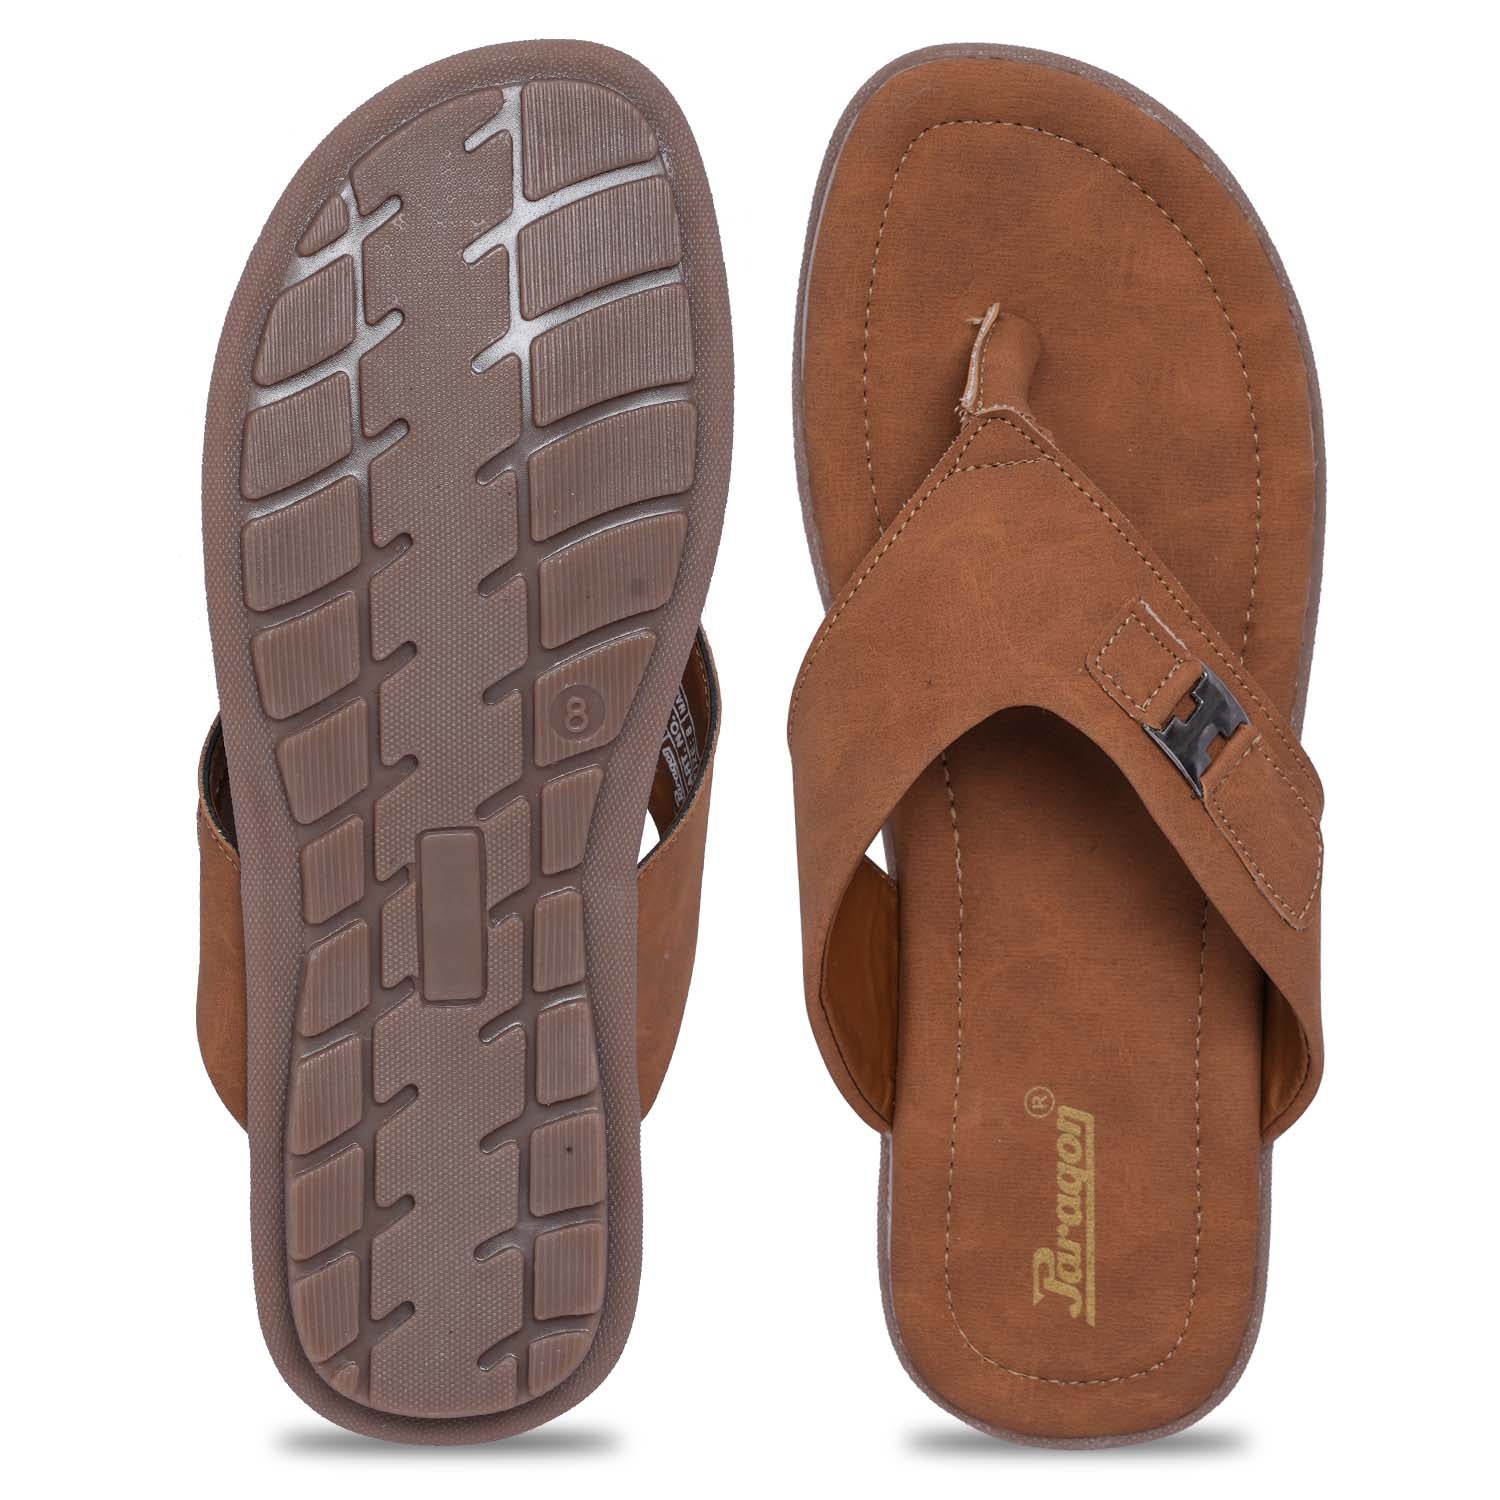 Paragon R4005G Men Stylish Sandals | Comfortable Sandals for Daily Outdoor Use | Casual Formal Sandals with Cushioned Soles